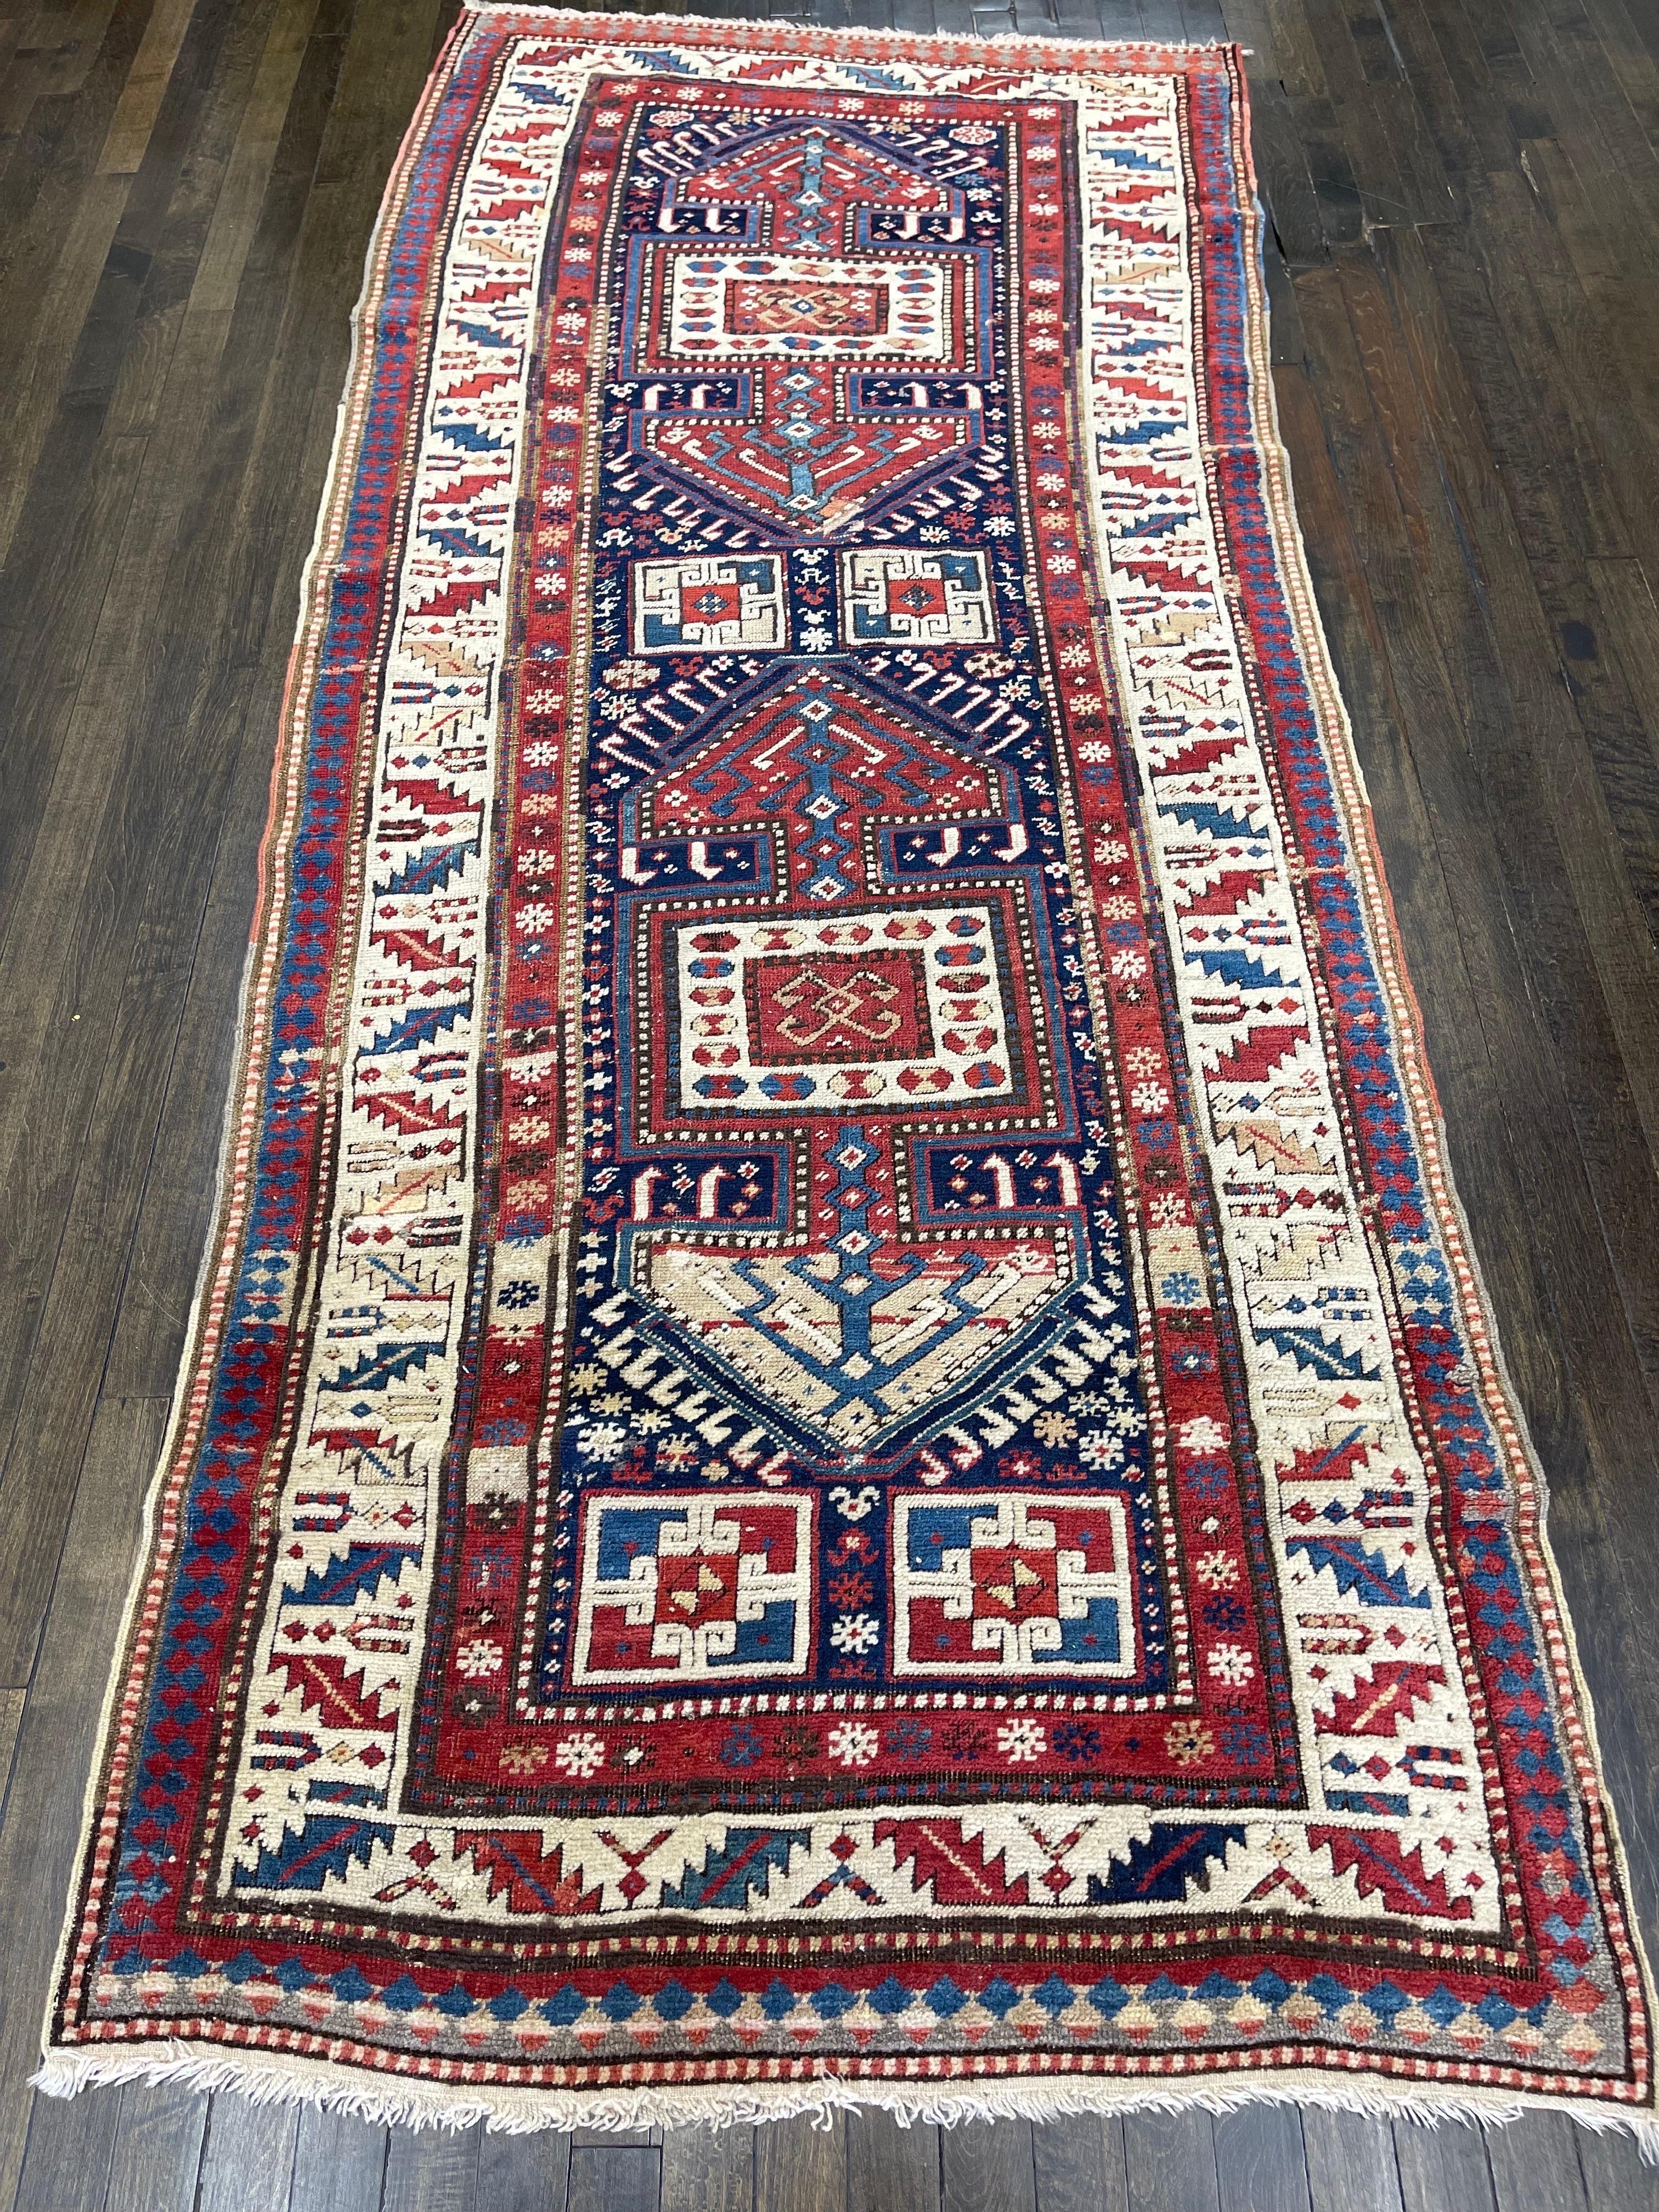 A bold and handsome example of the Surahani Baku garden design, this rug was handwoven in the Caucasus mountains, perhaps in the east central region. 

With brilliant colors of reds, blues, green and ivory this rug would have a visible presence in